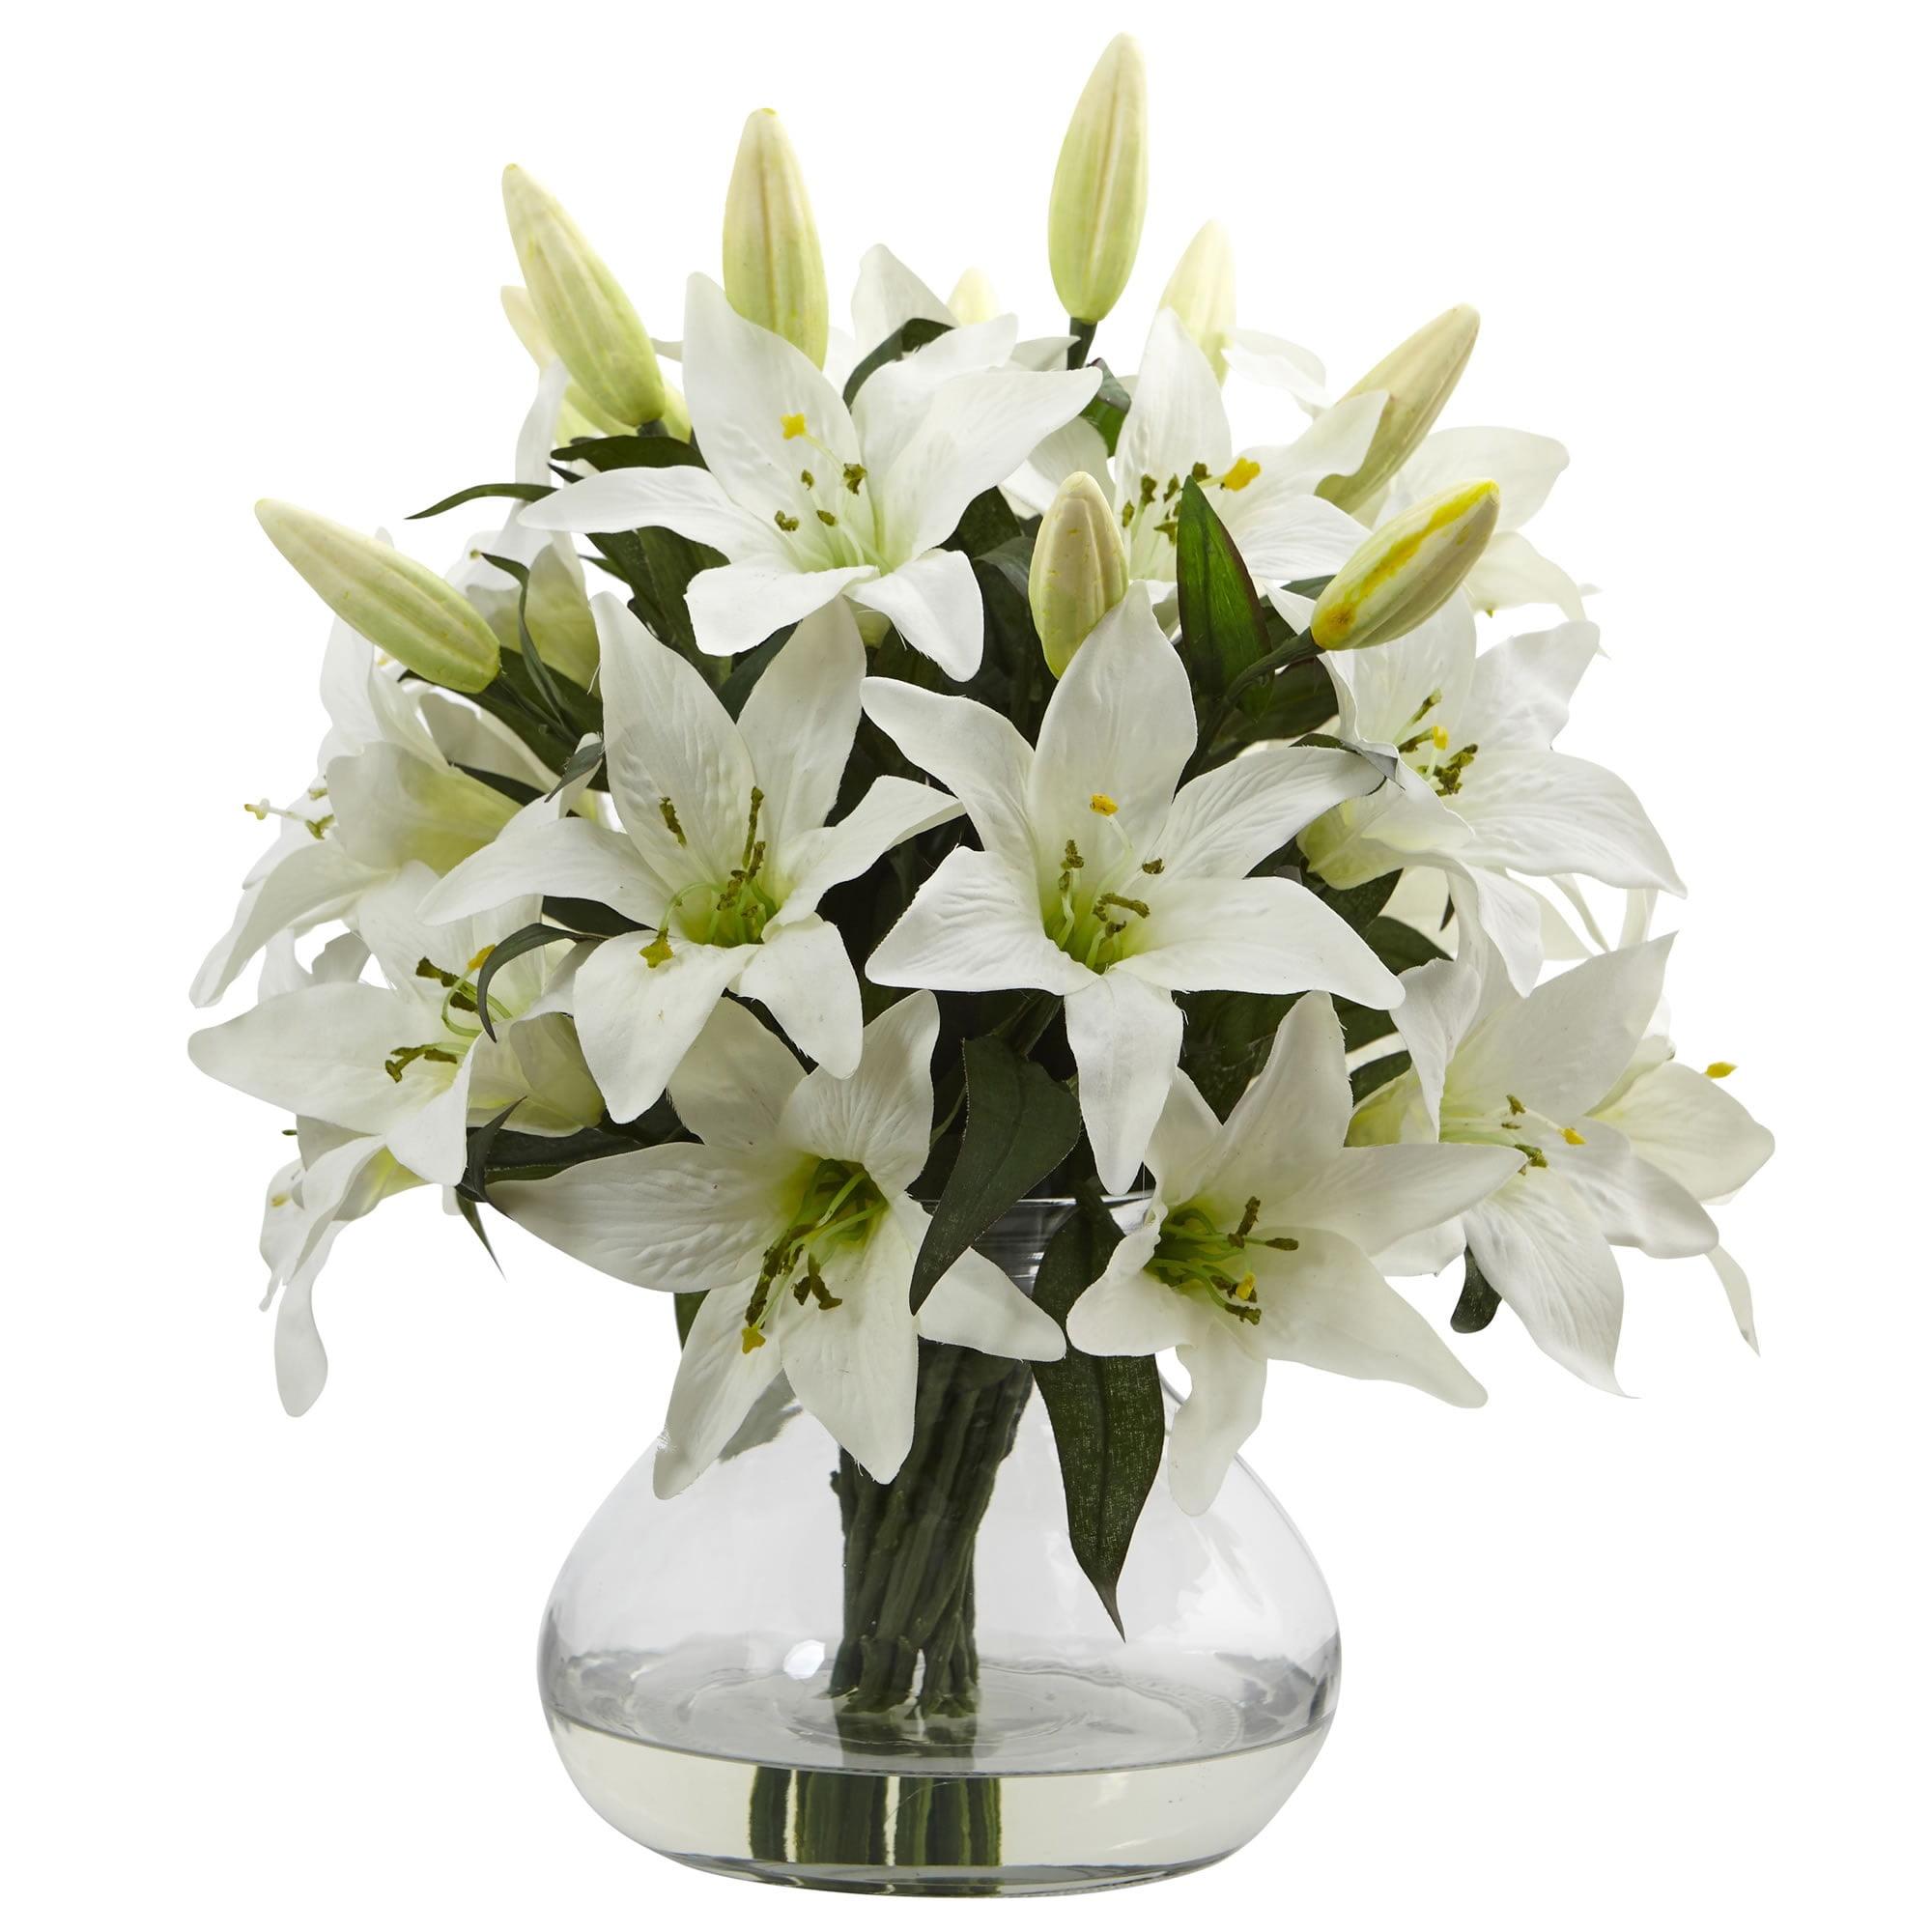 Luscious White Lily Tabletop Arrangement in Curved Glass Vase